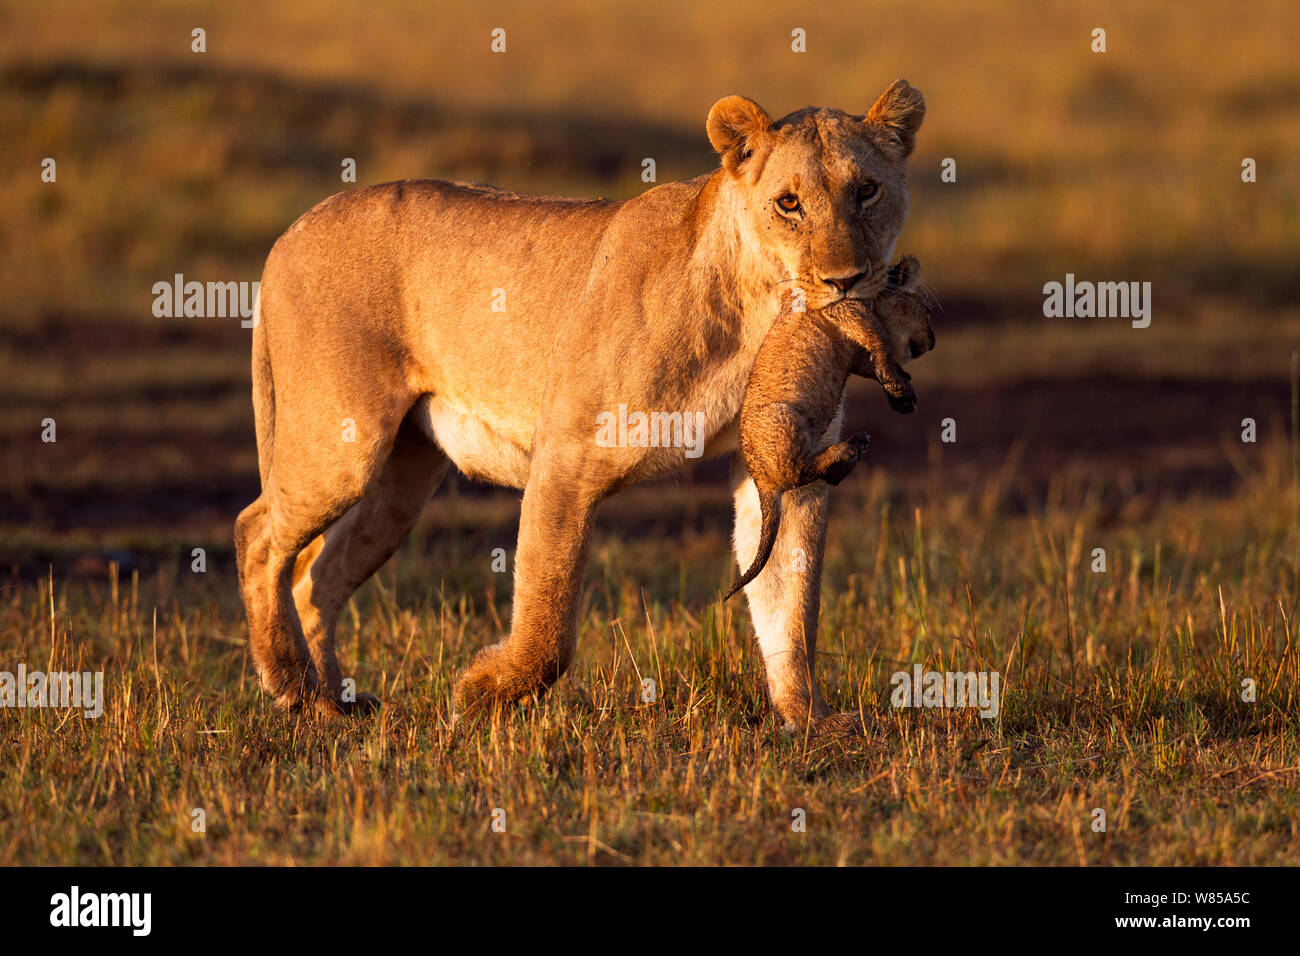 Lioness (Panthera leo) carrying a cub aged less than 1 month in her mouth. Masai Mara National Reserve, Kenya, August Stock Photo